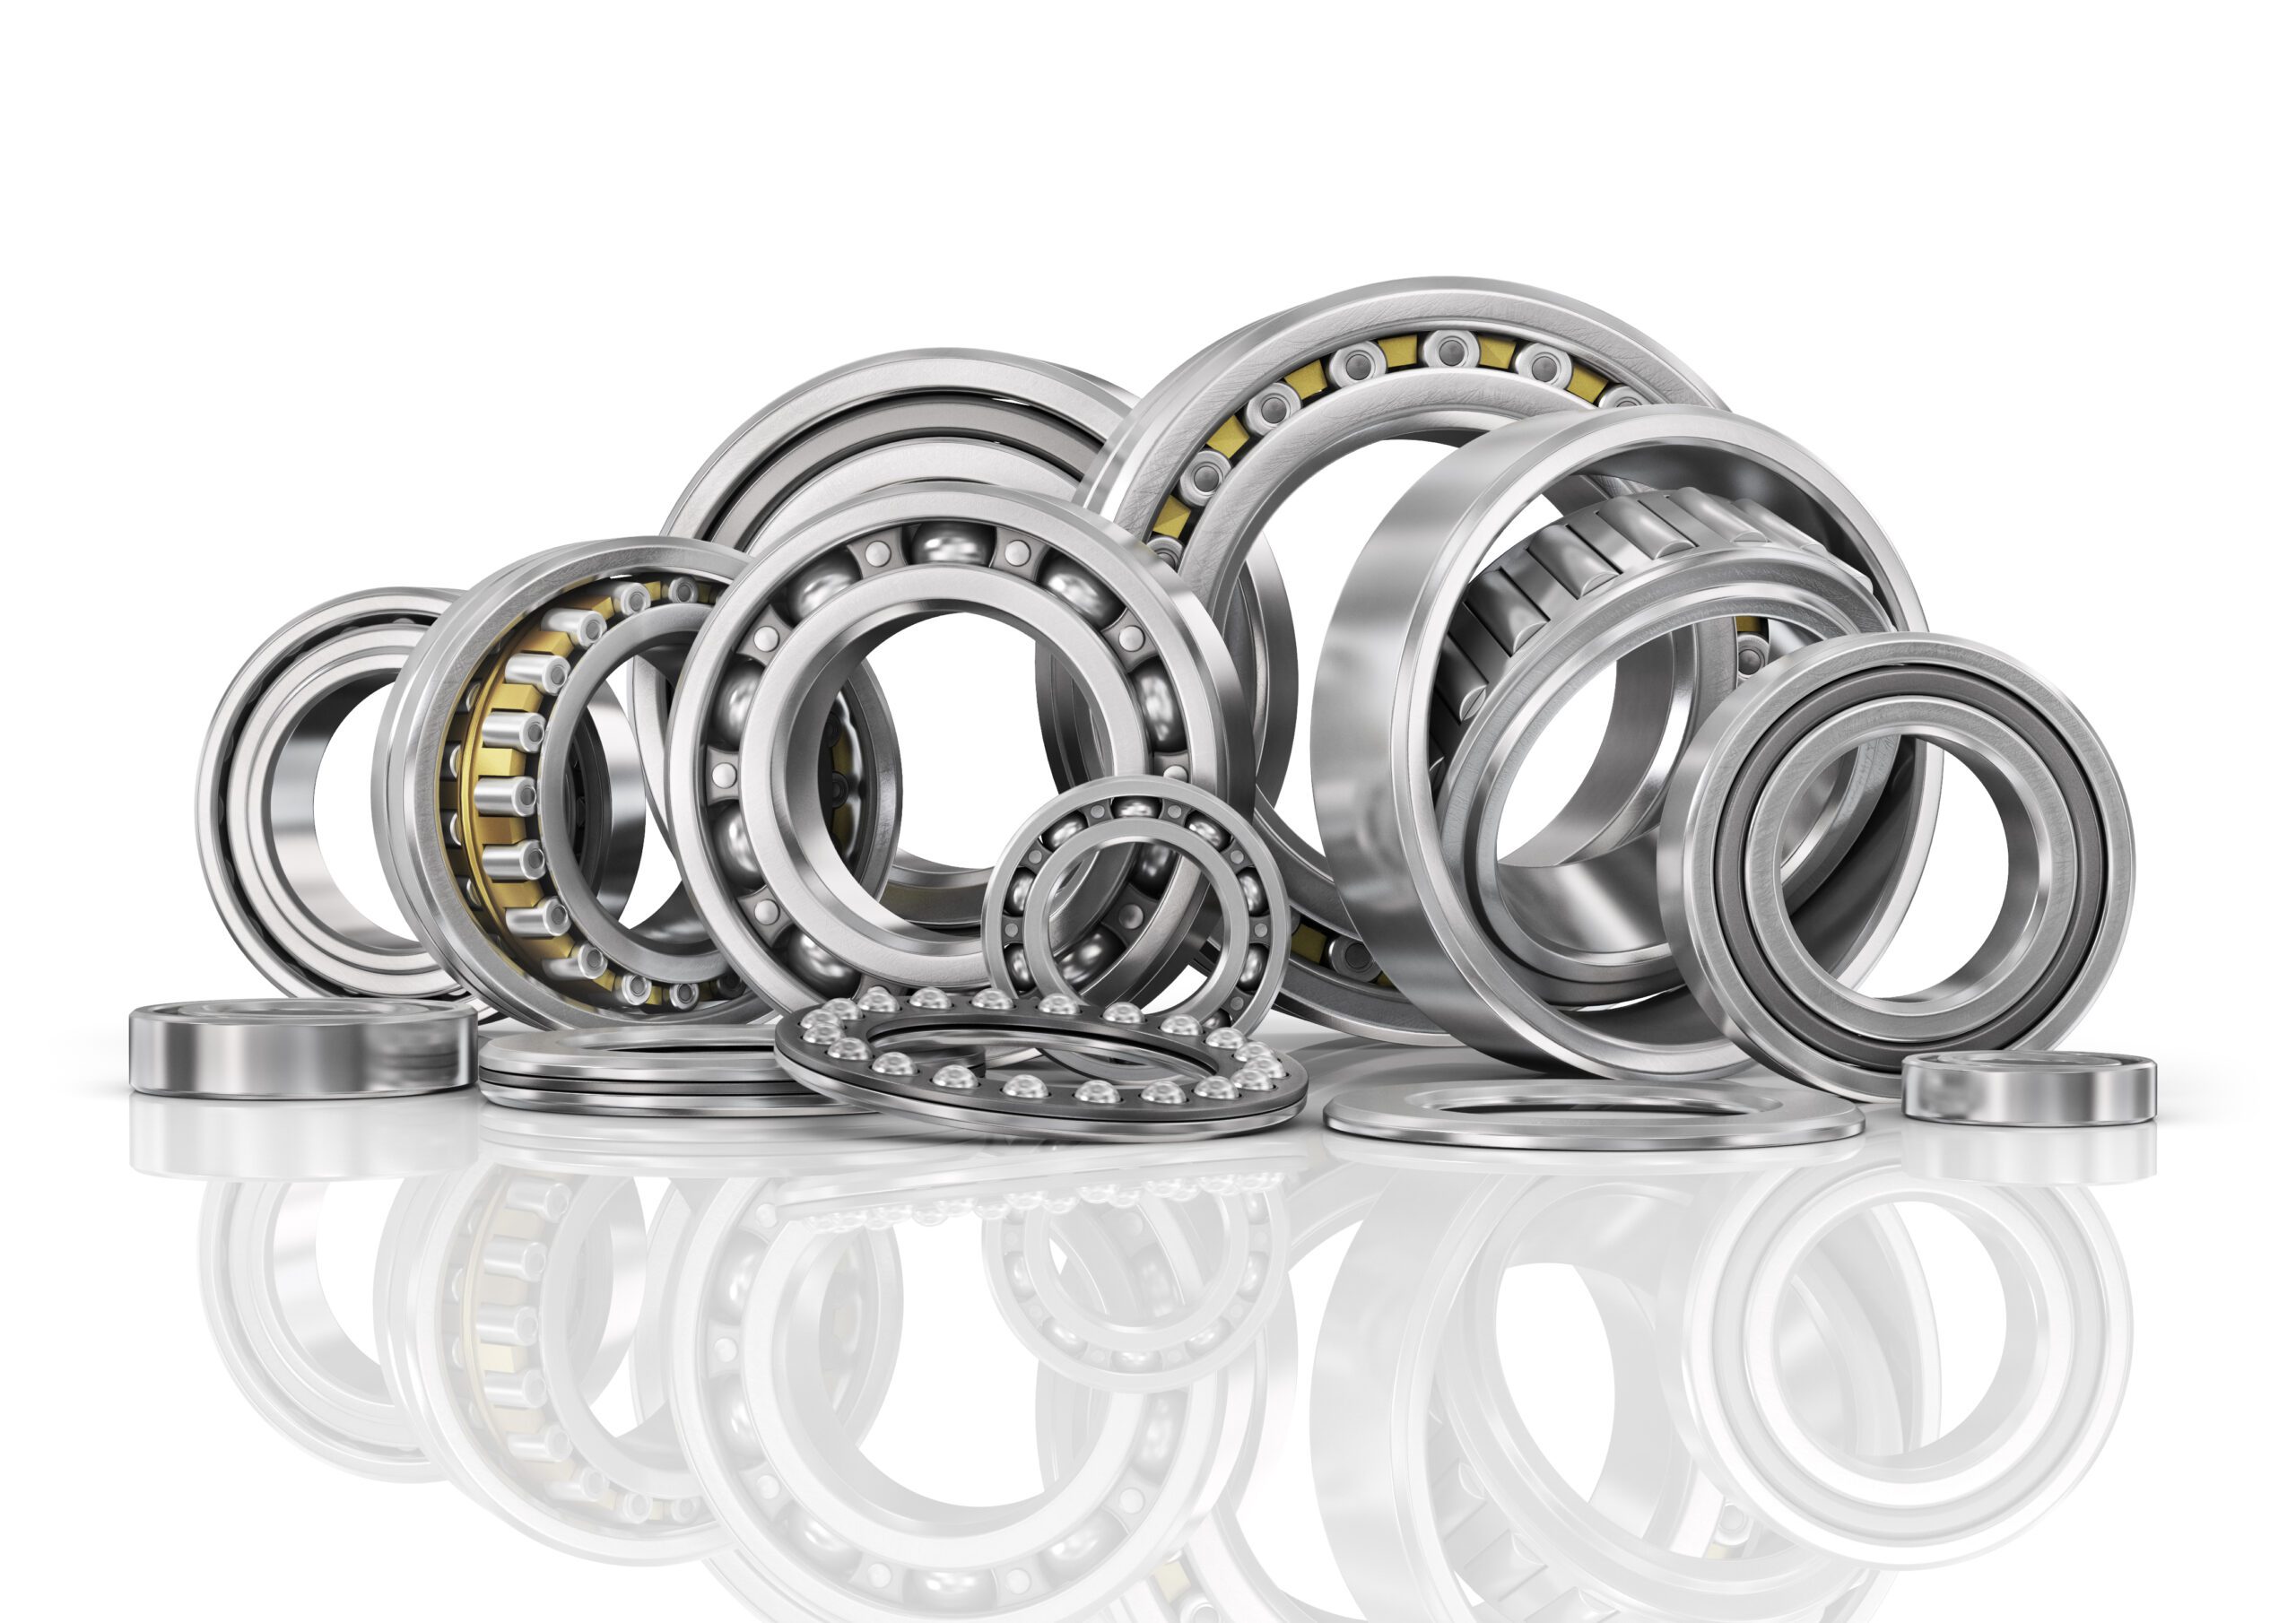 Products | Bearing Service Company